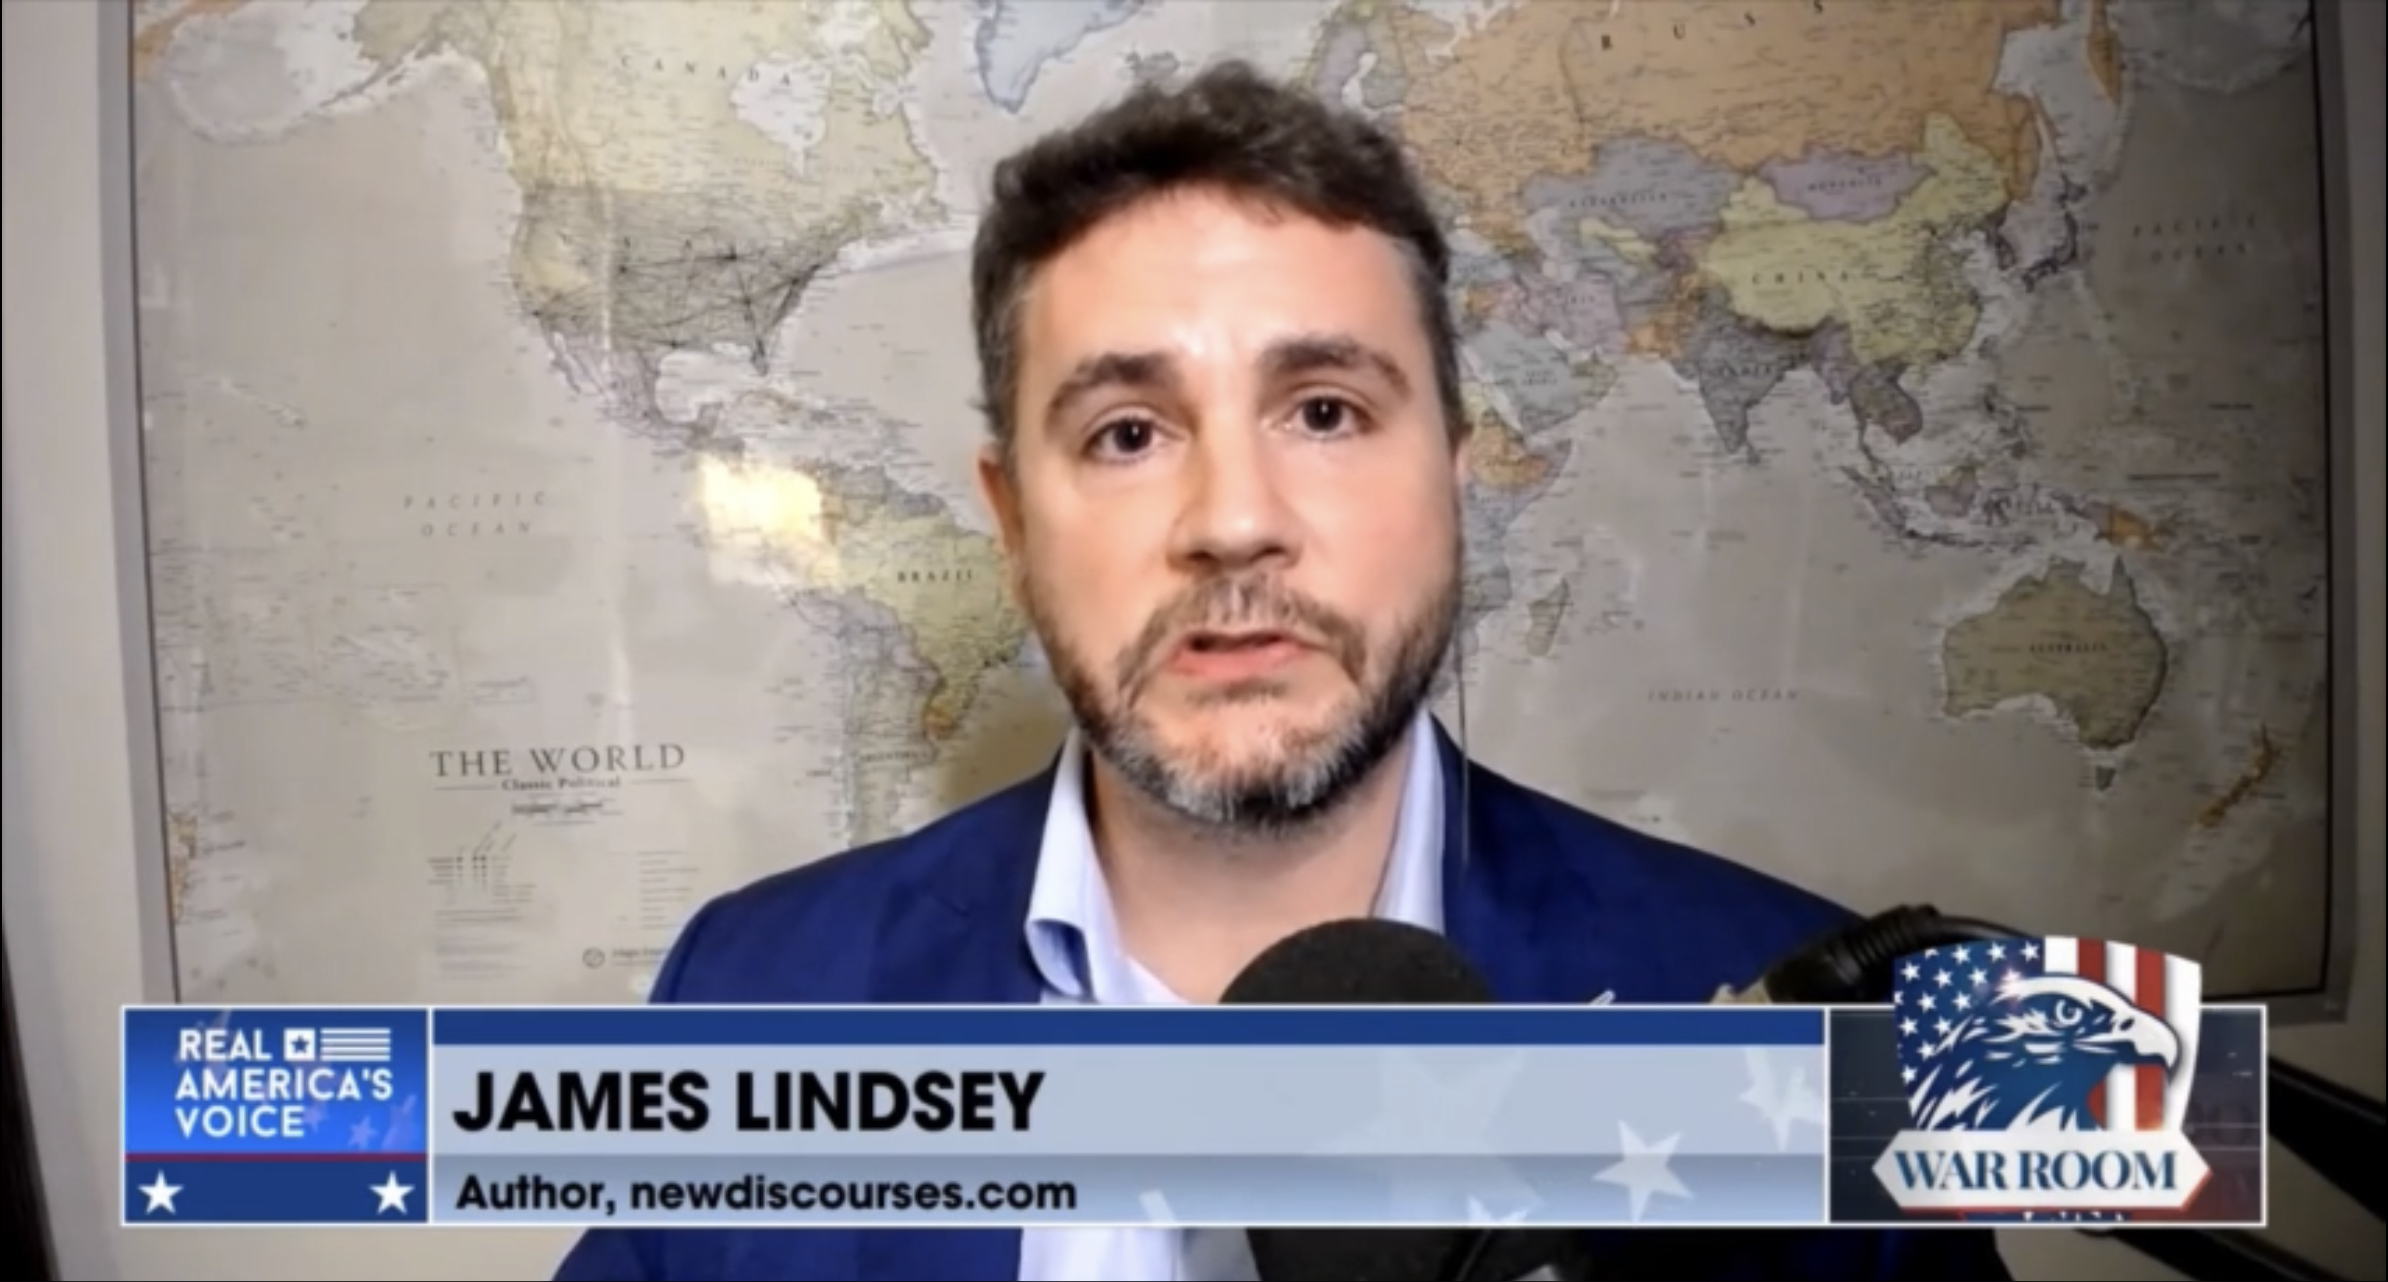 Dr. James Lindsey: “This is the plan to hand over all sovereign Nations of the world, to the UN”